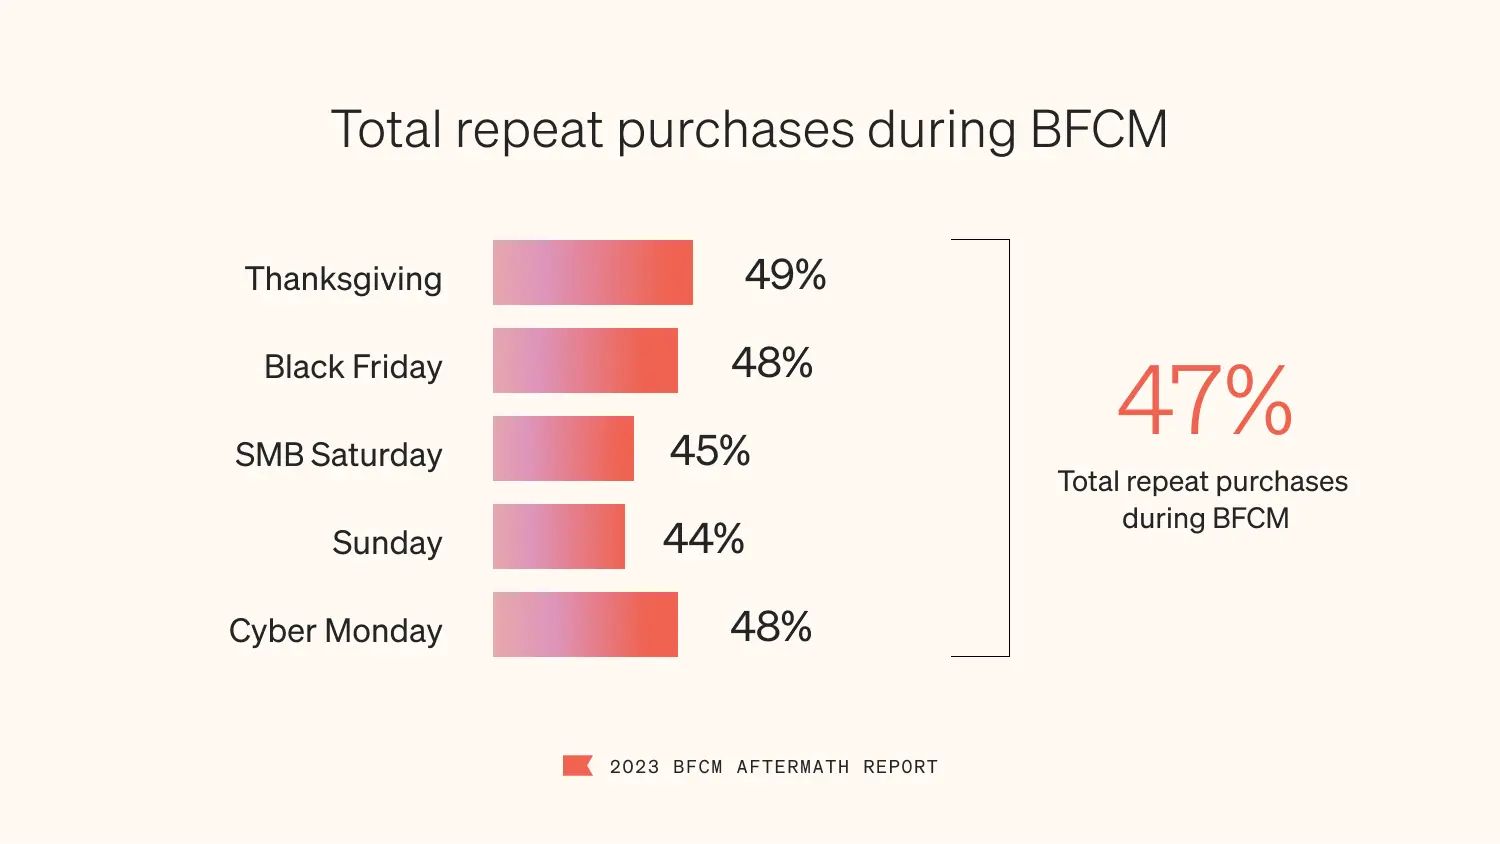 In a color scheme of black font and poppy bars on a cotton background, image visualizes repeat purchase data from BFCM for Klaviyo customers. 47% of all purchases were made by repeat purchasers, with the most repeat purchases happening on Thanksgiving (49%) and Black Friday and Cyber Monday (both 48%).